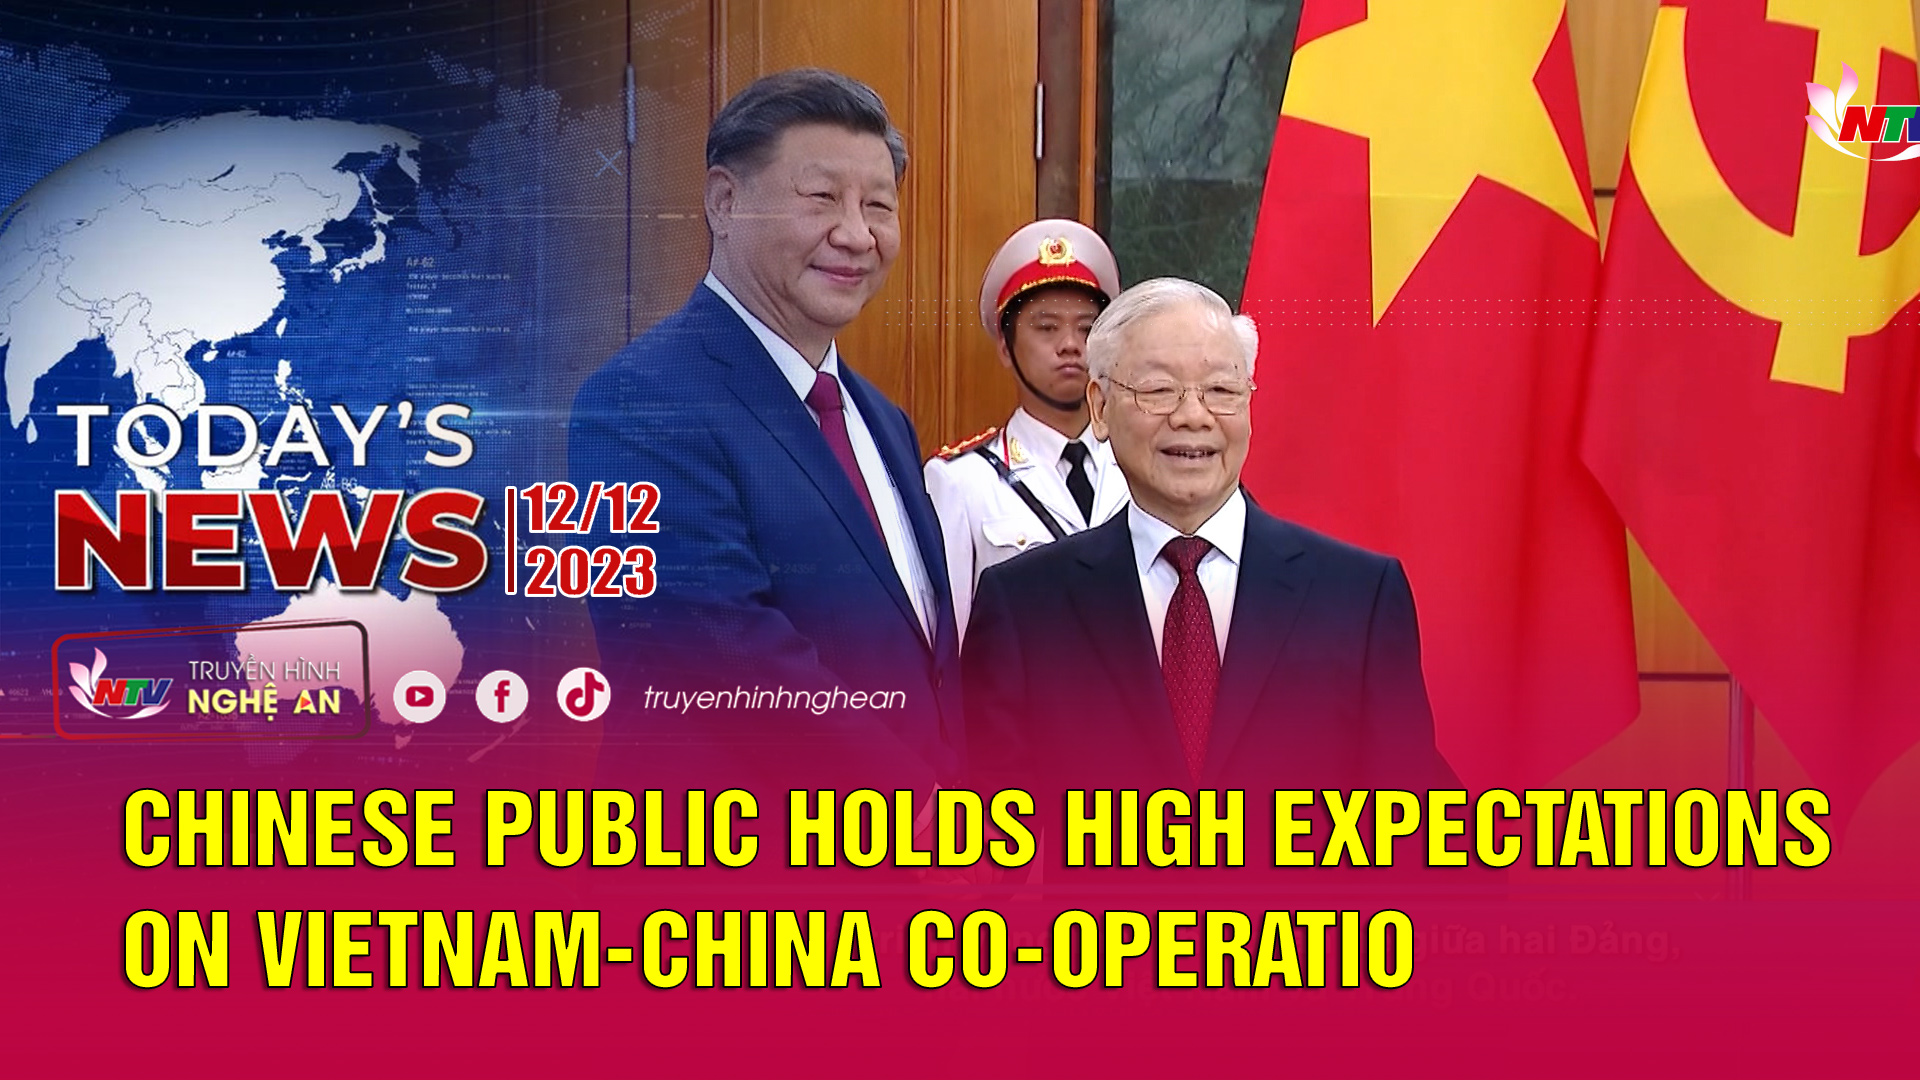 Today's News - 12/12/2023: Chinese public holds high expectations on Vietnam-China co-operation